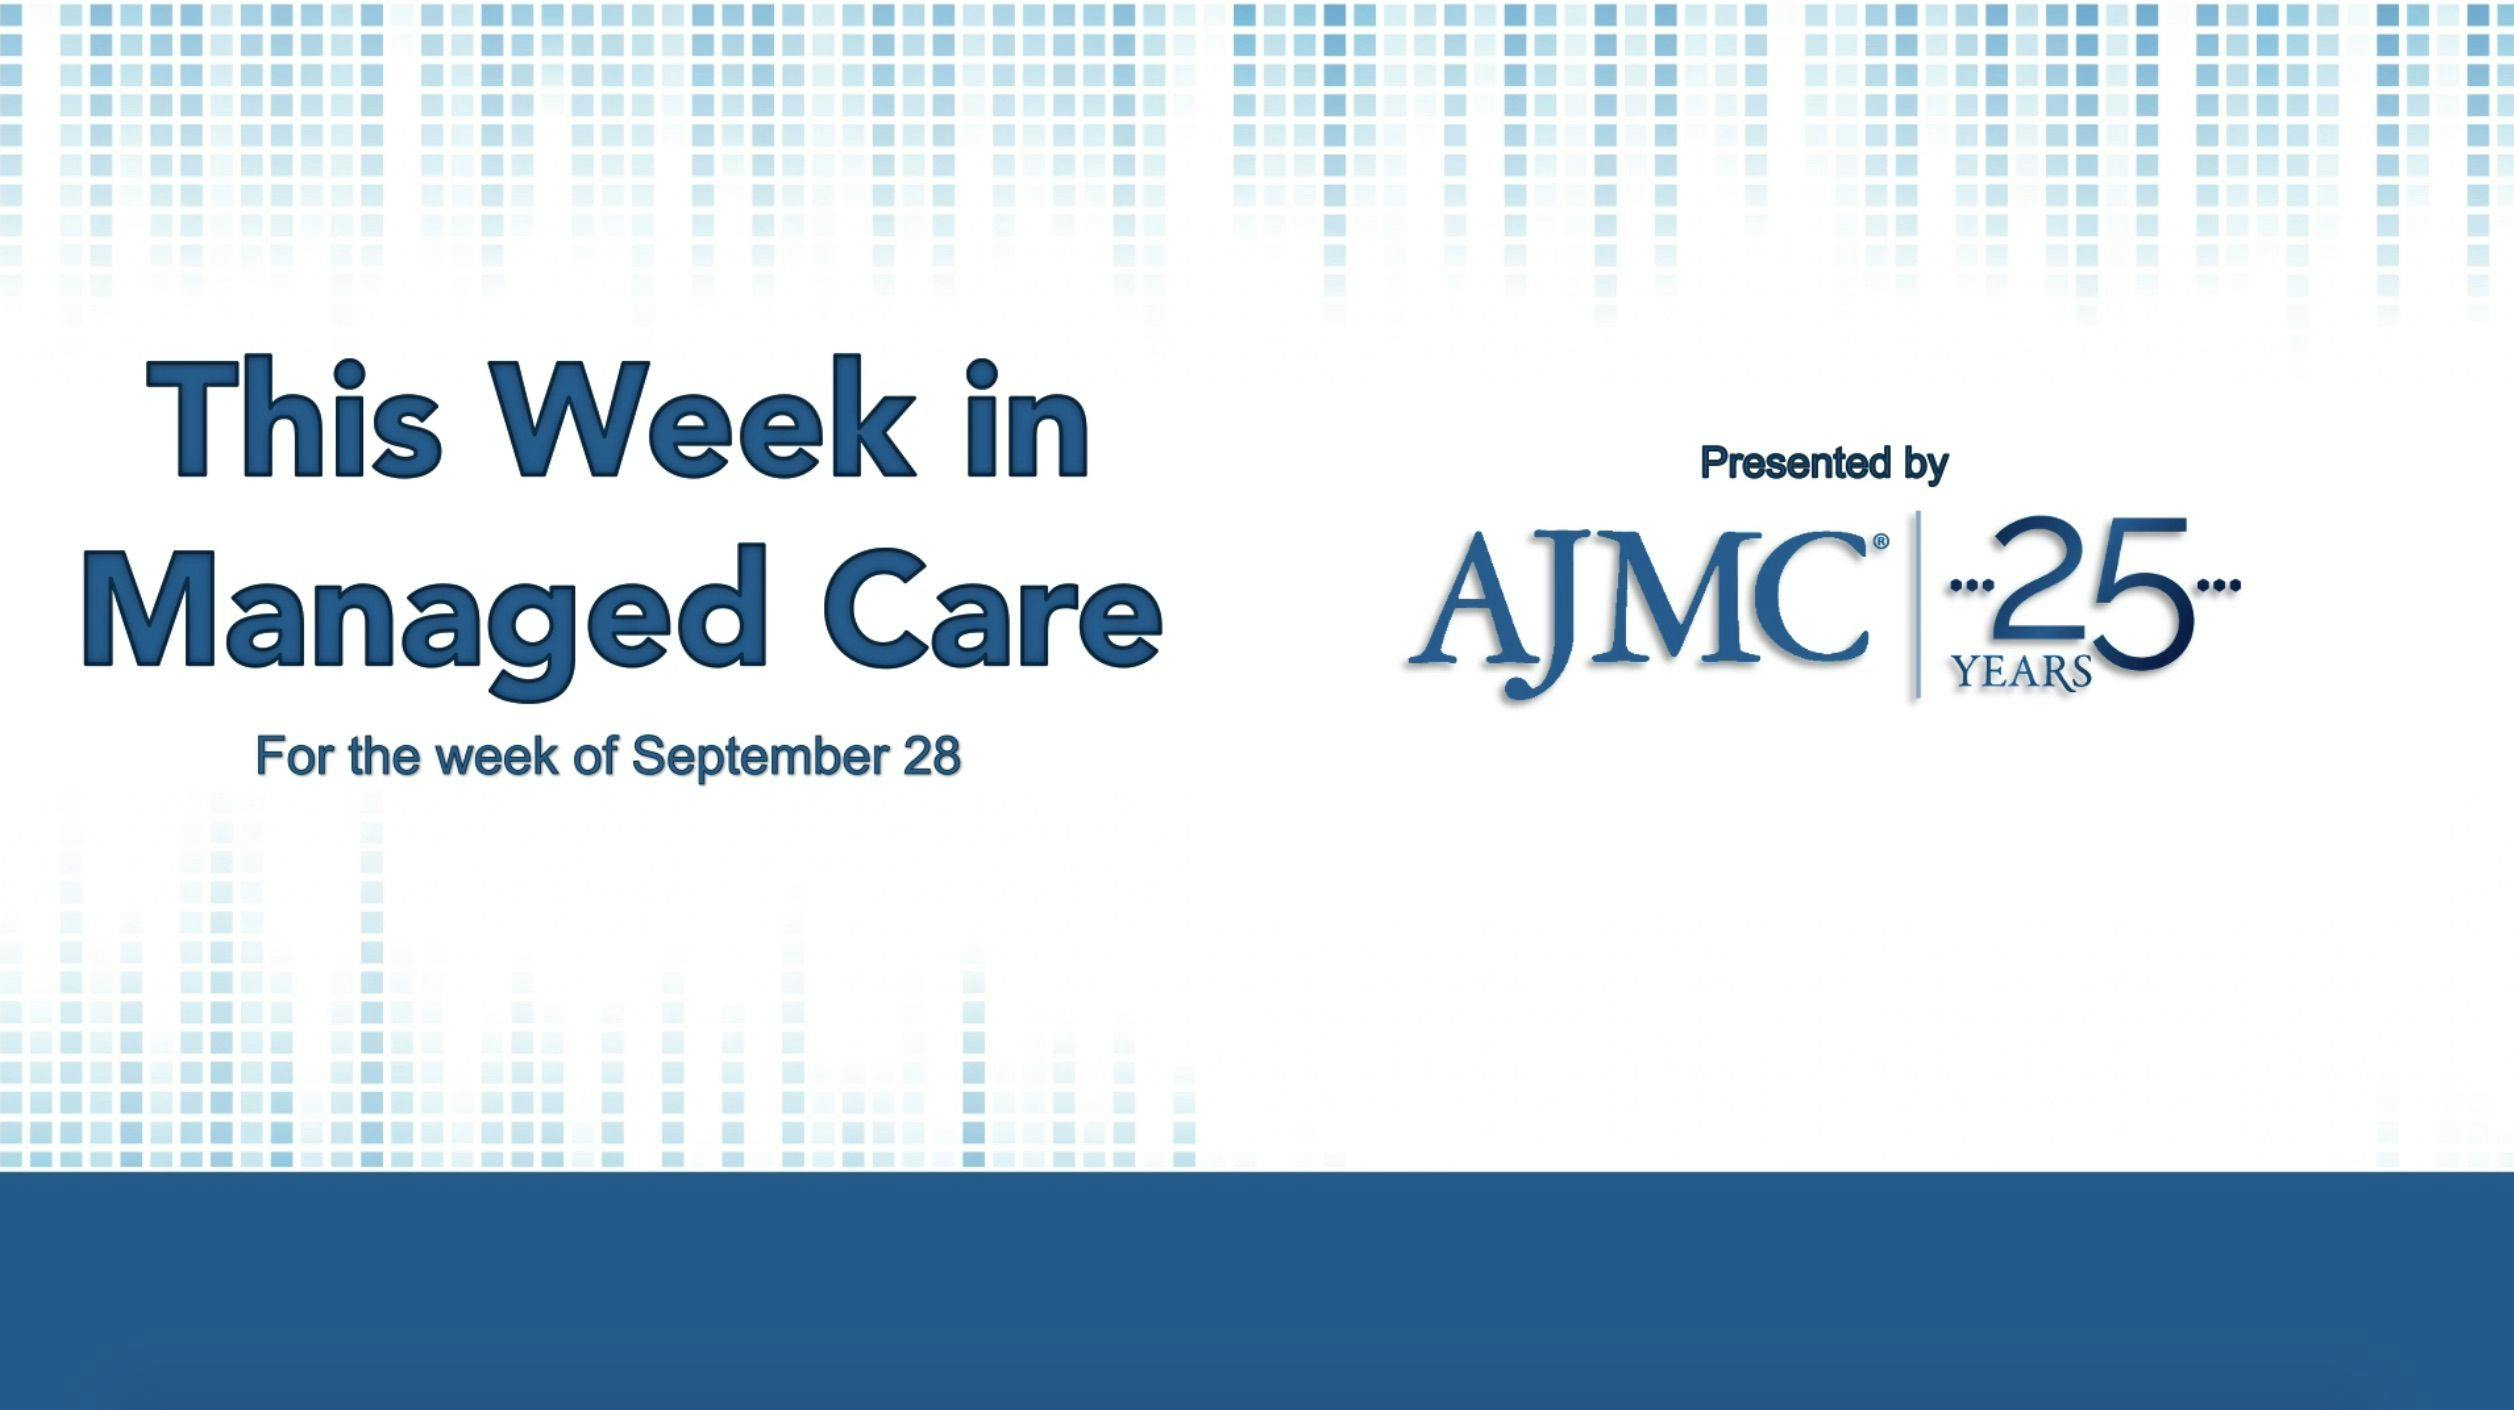 This Week in Managed Care: October 2, 2020